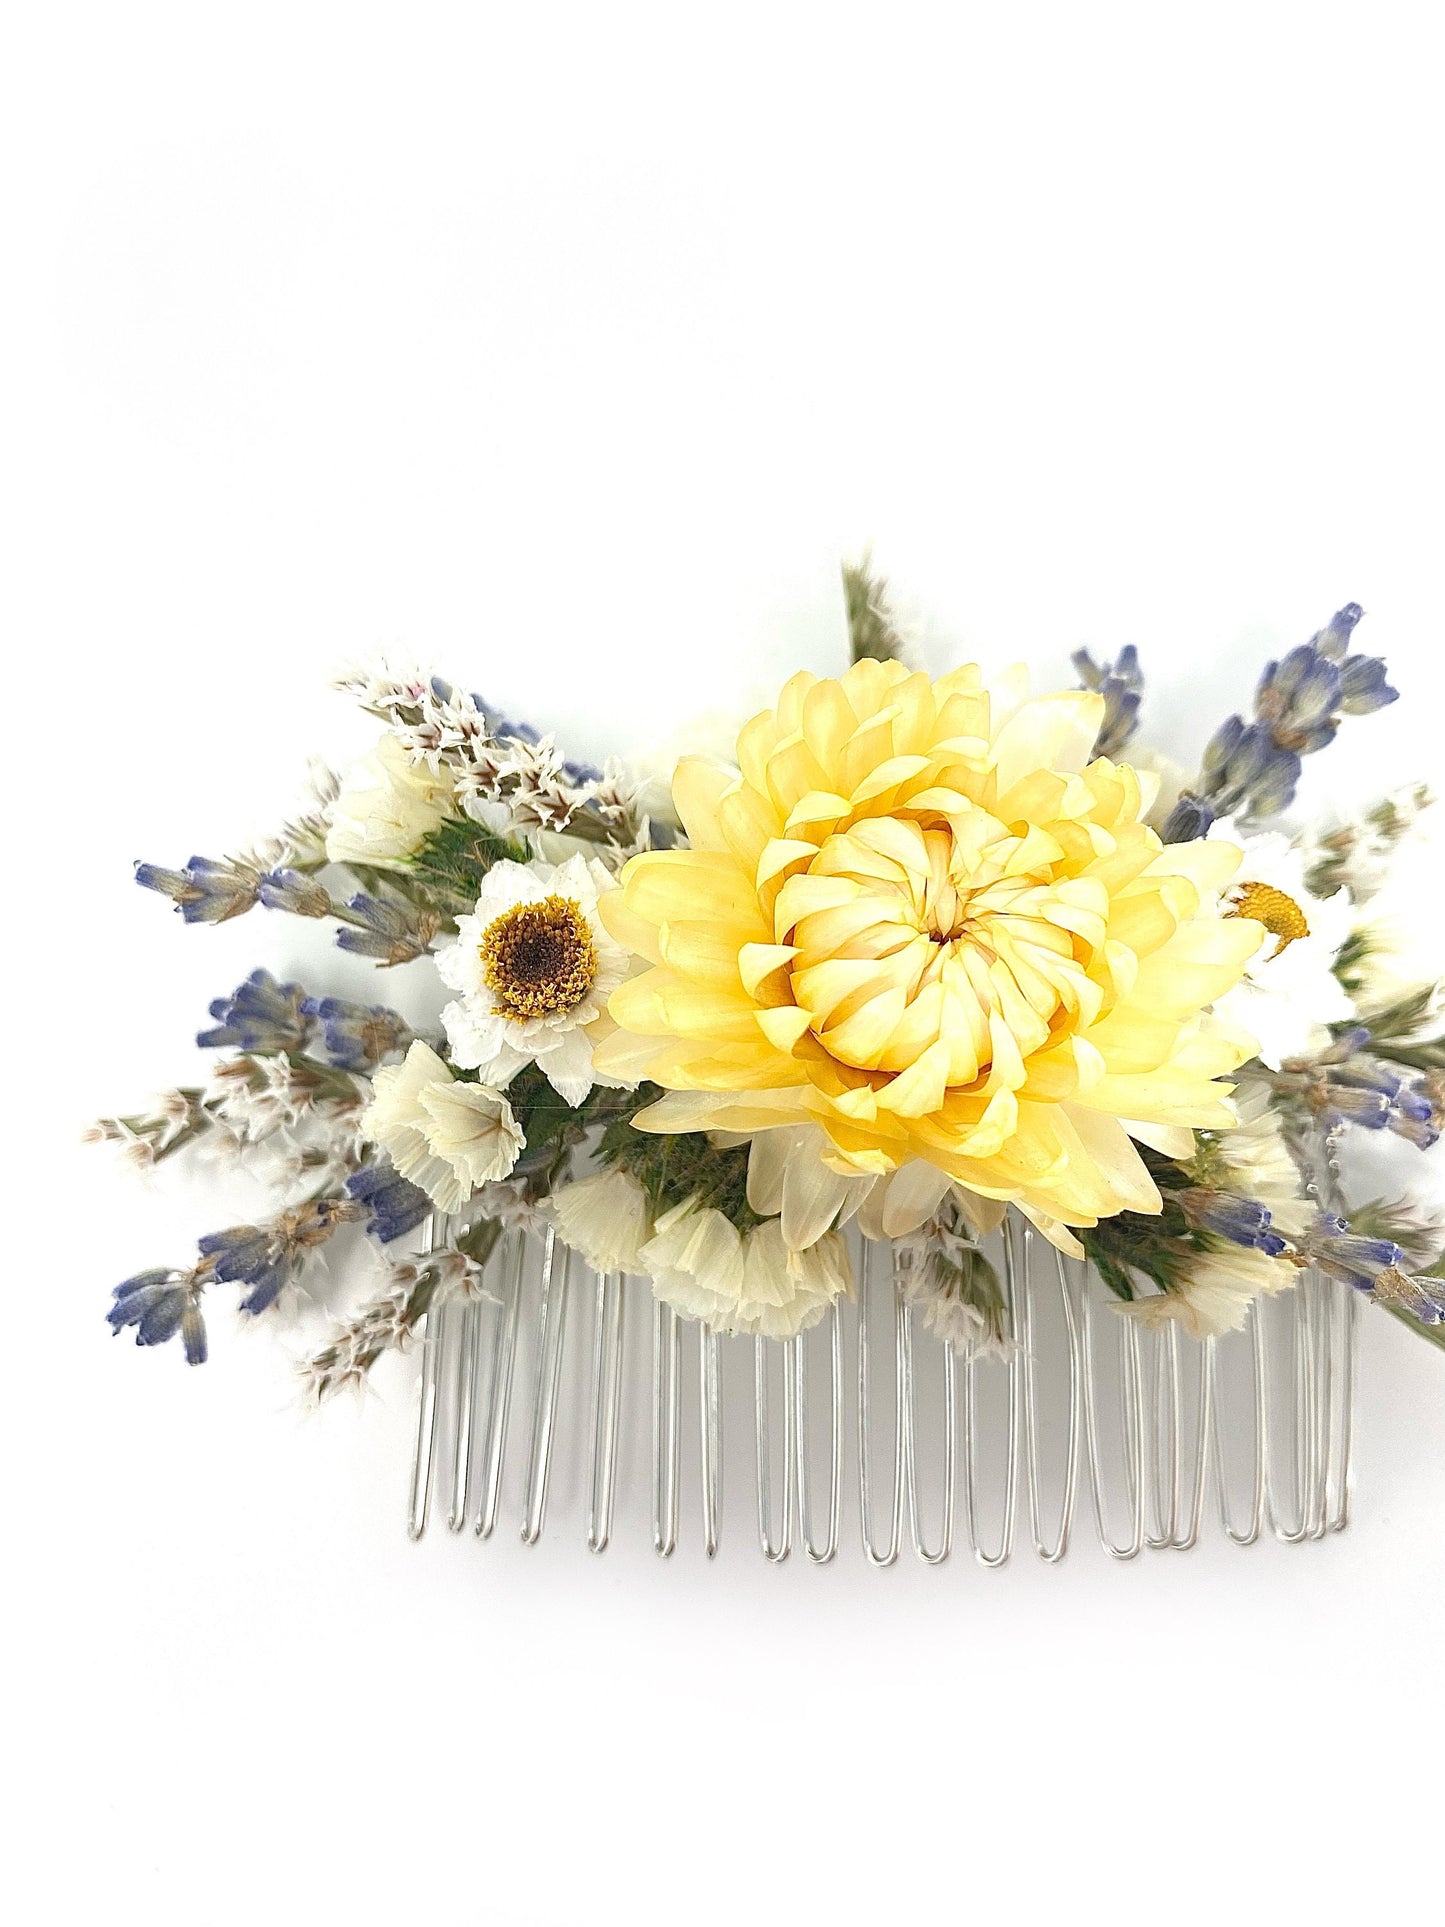 Hair Comb, Dried Flowers, Preserved Floral, Hair Accessories, Wedding Accessories, Strawflowers, Prom,  Lavender, German Statice, Ammobium